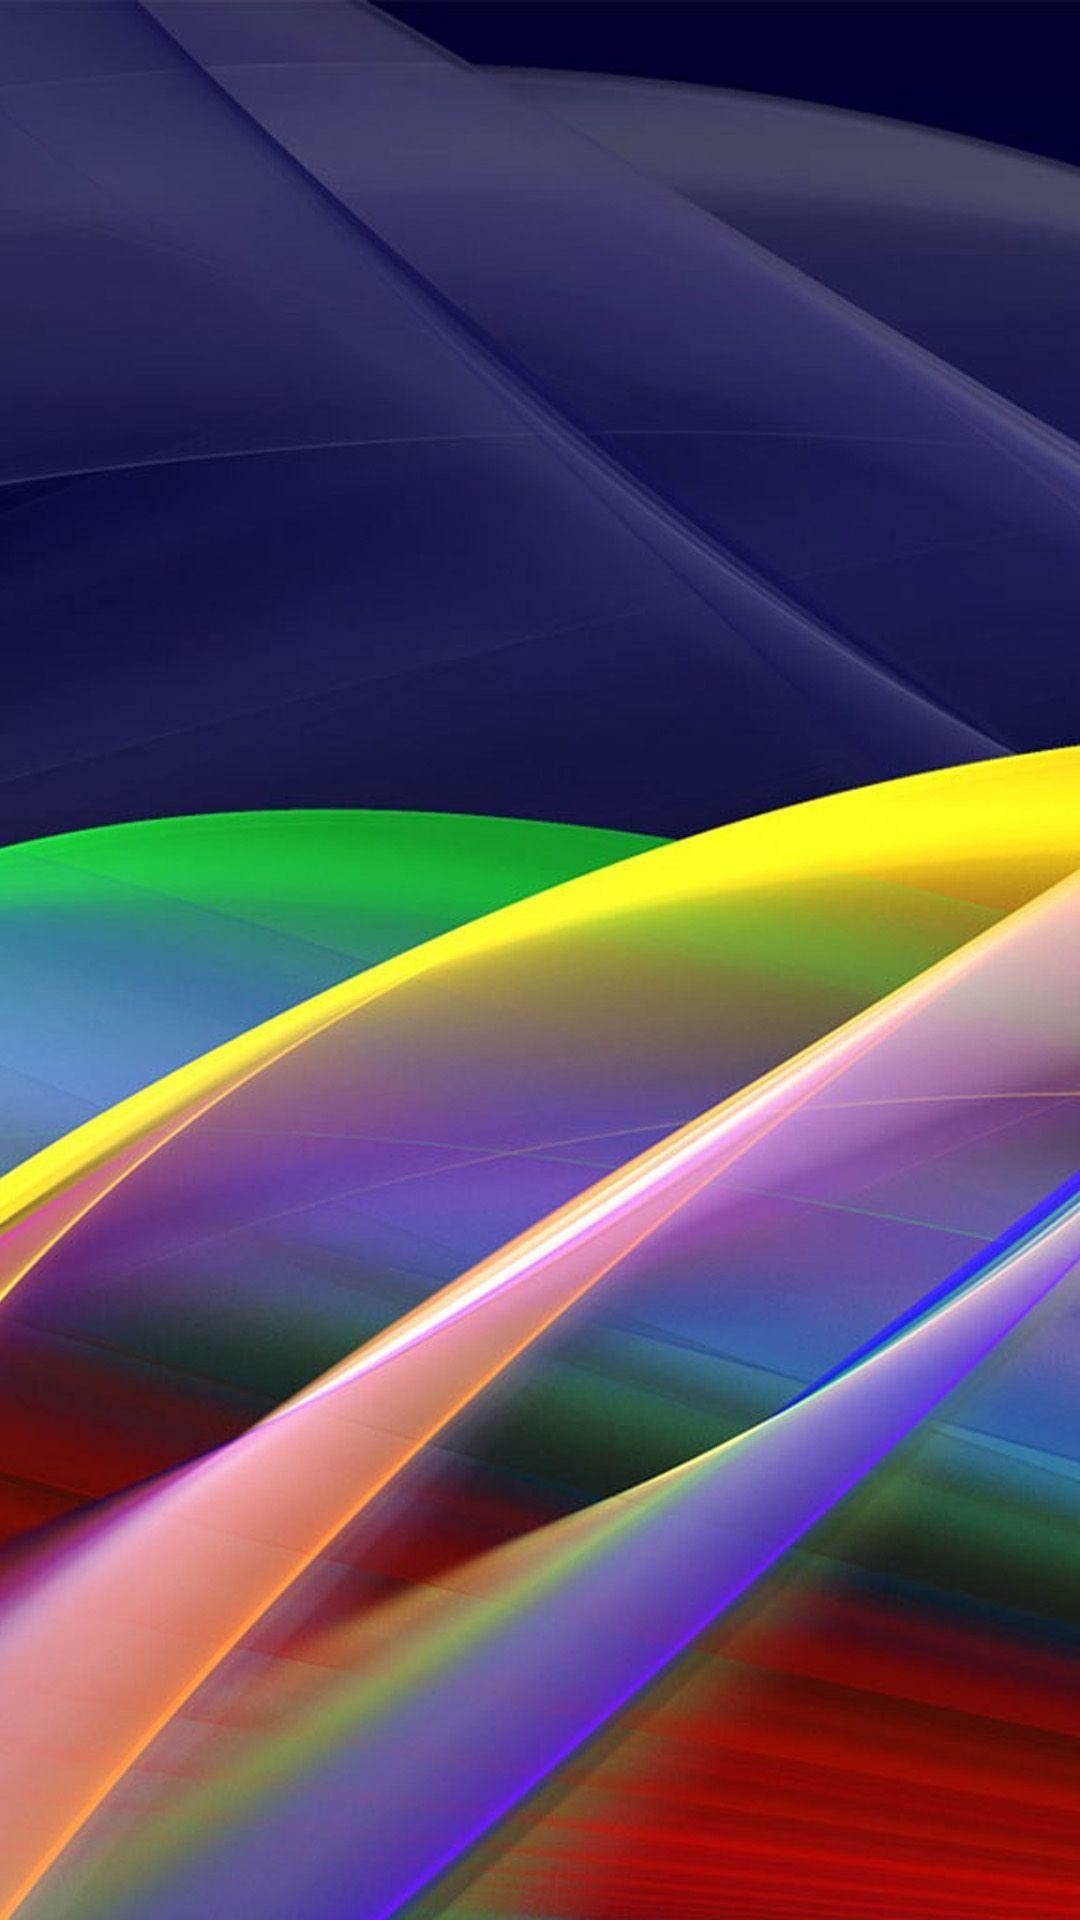 Samsung Galaxy S5 Wallpapers - Top Free